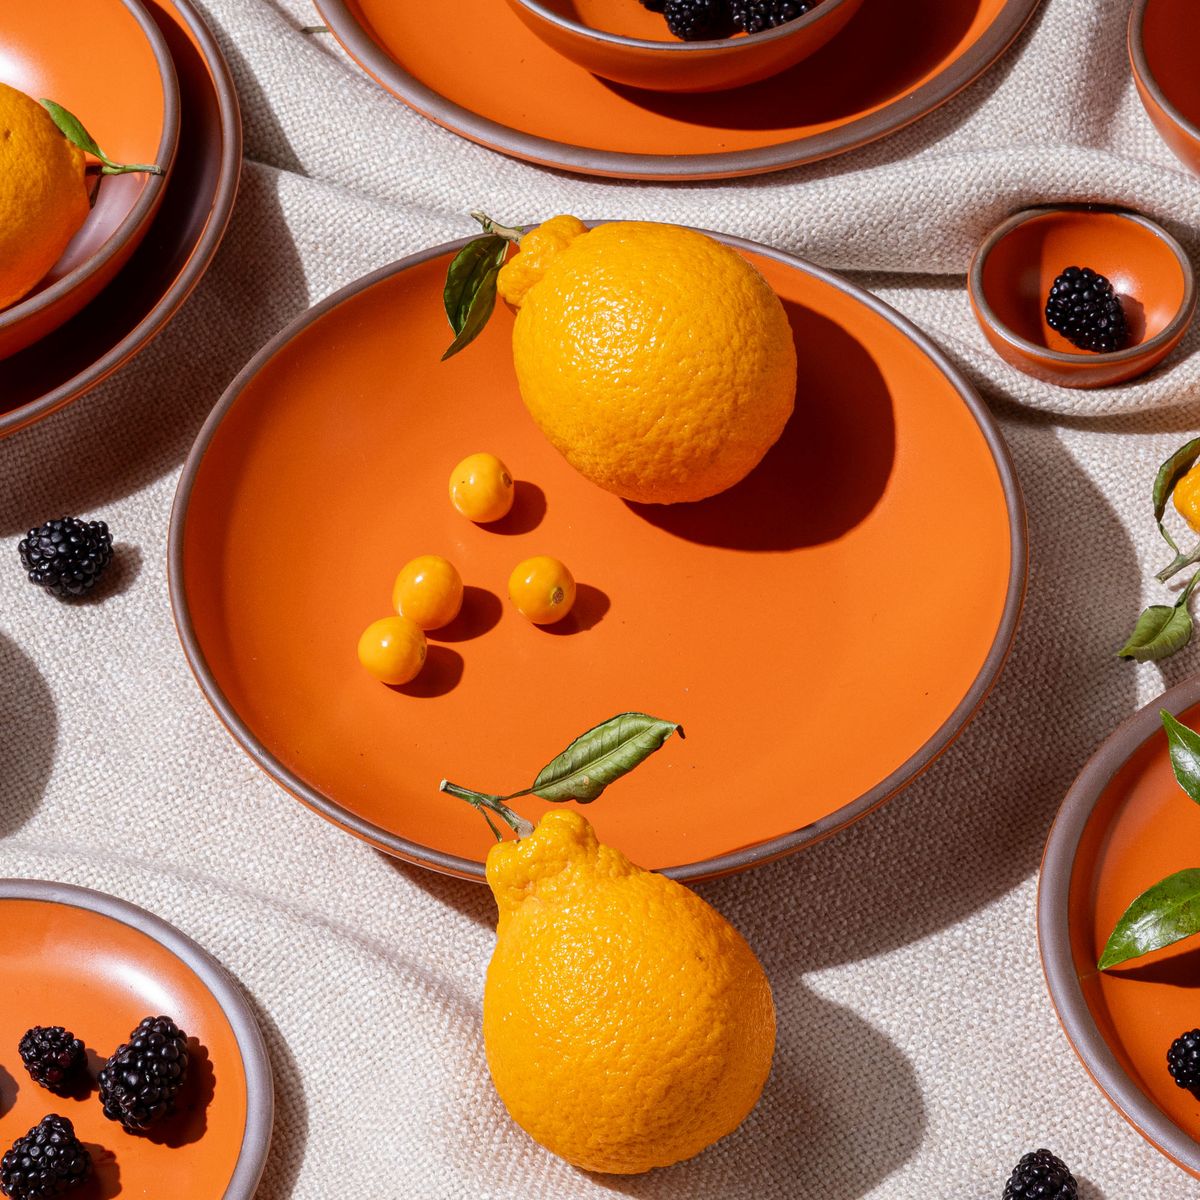 A large ceramic plate with a curved bowl edge in a bold orange color featuring iron speckles and an unglazed rim, topped with oranges and surrounded by other bowls and plates.